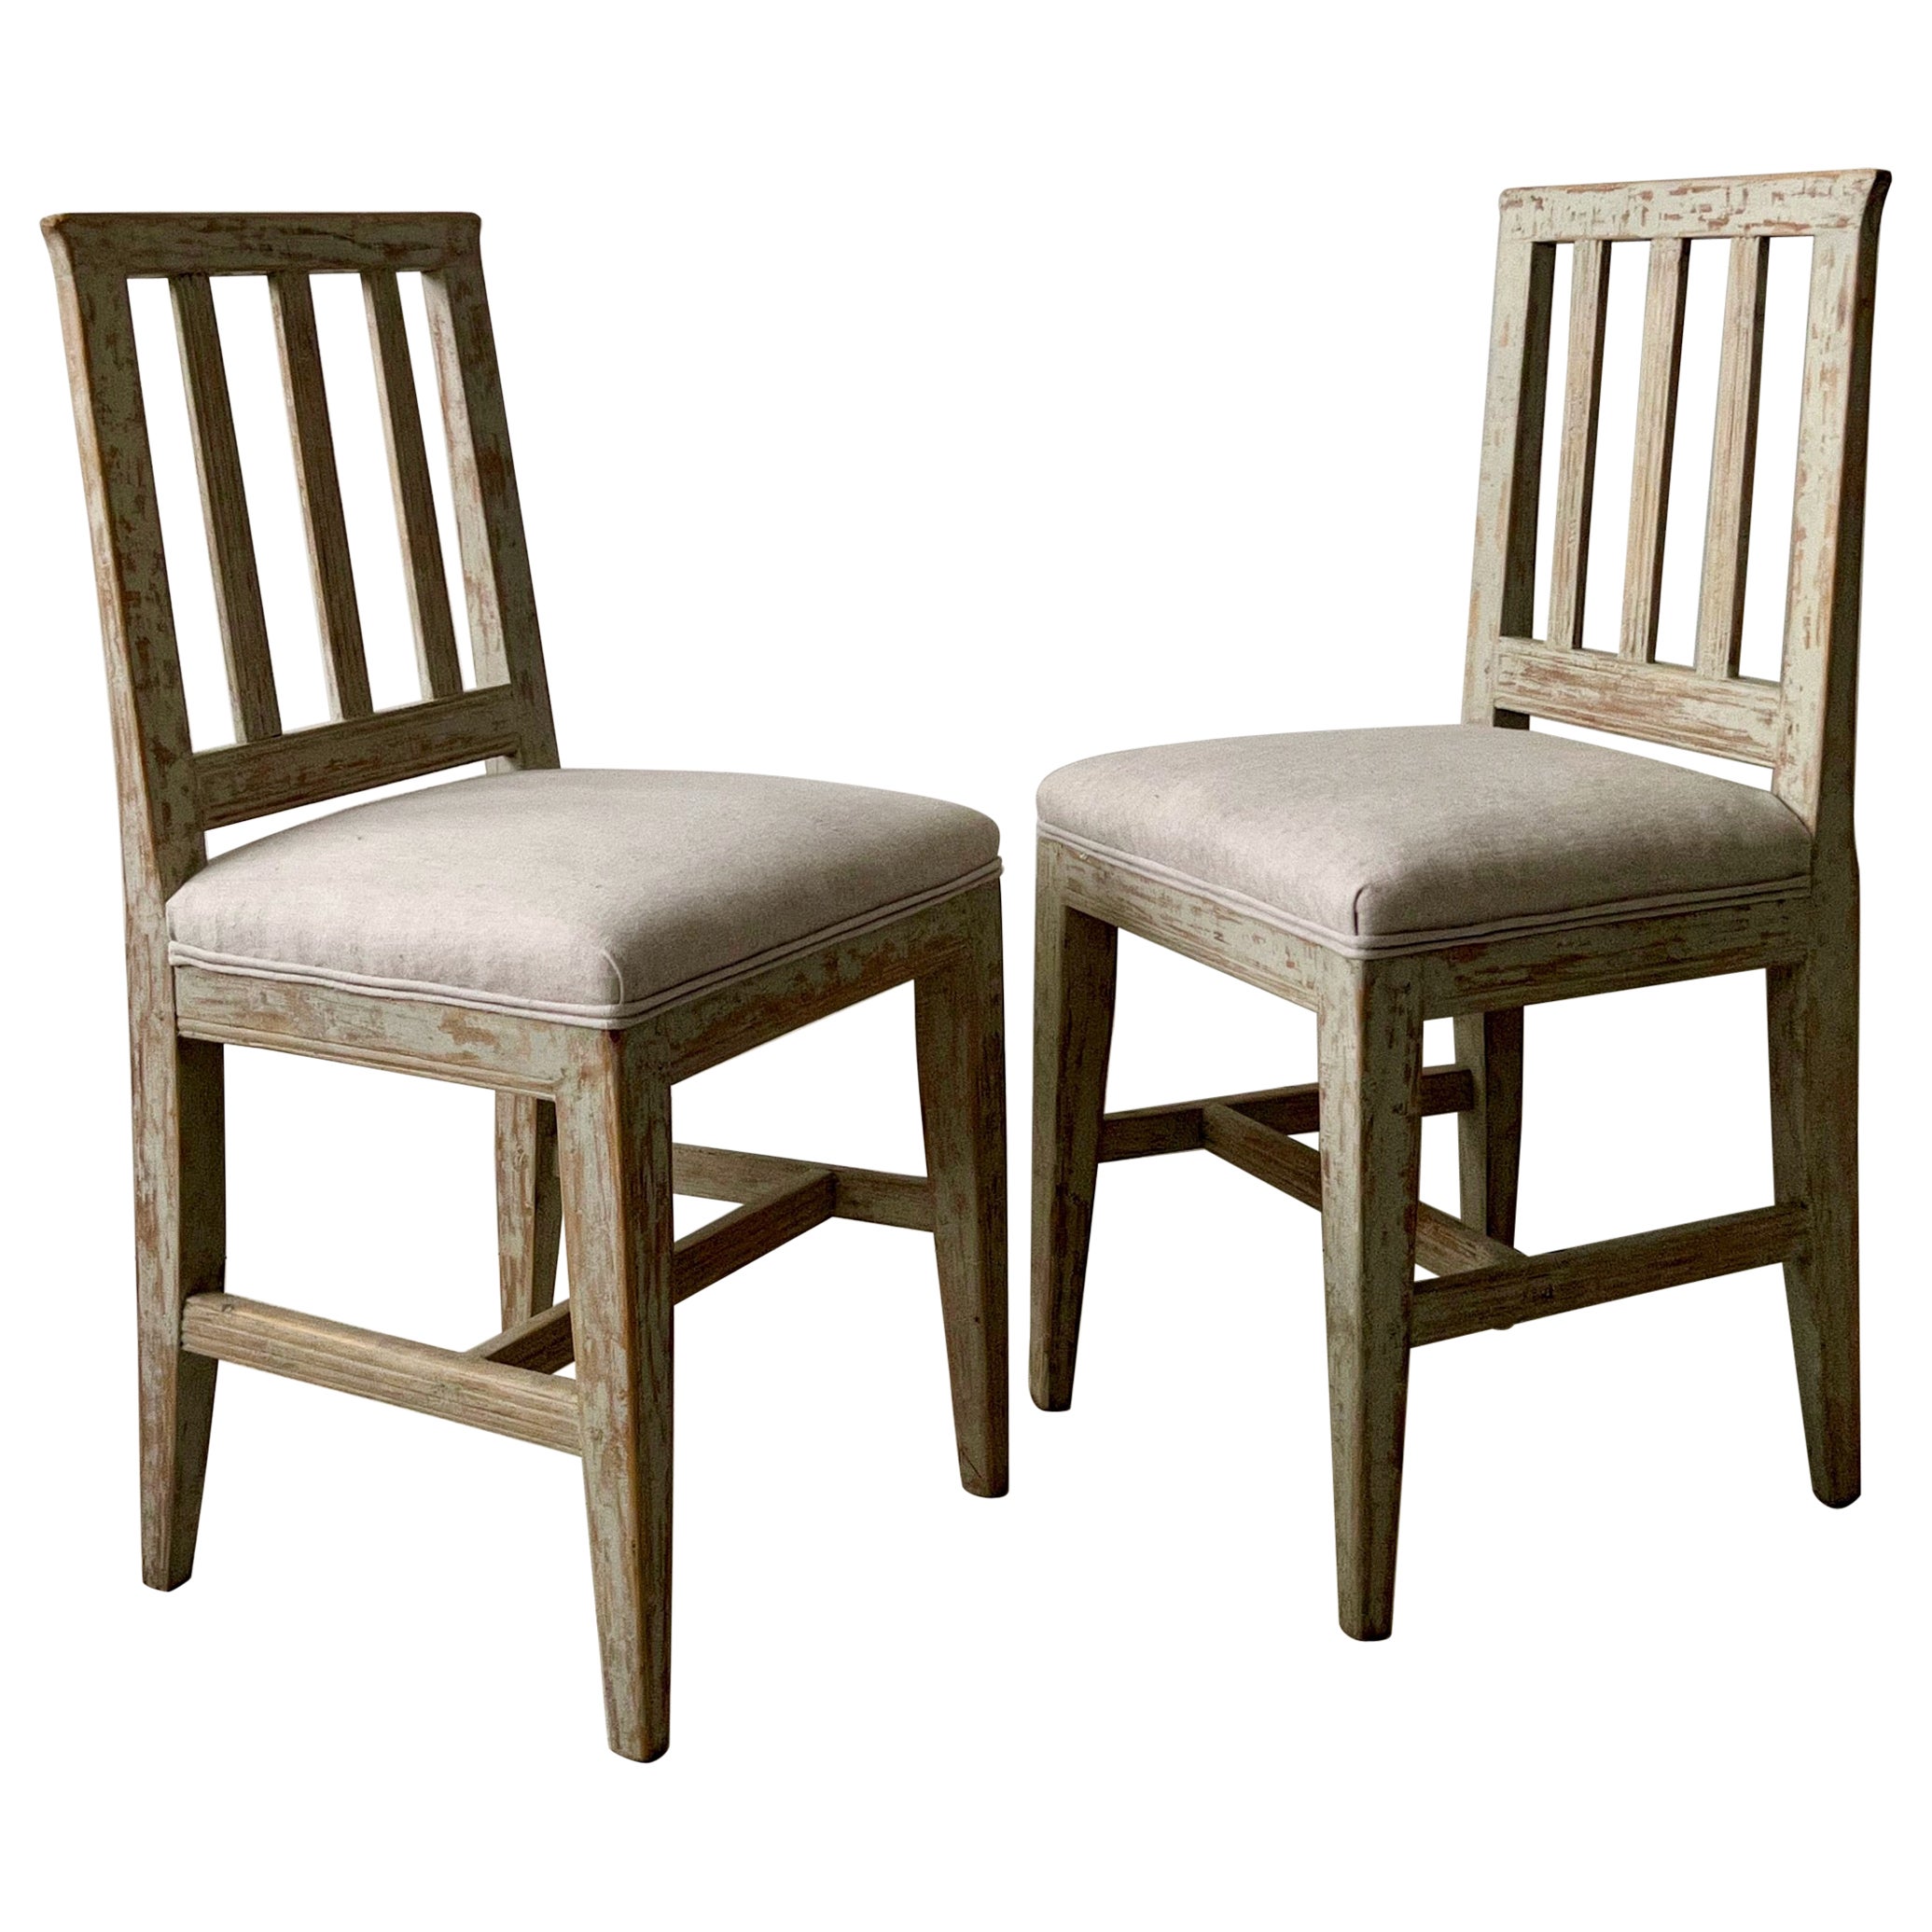 Pair of 19th Century Swedish Country Chairs For Sale